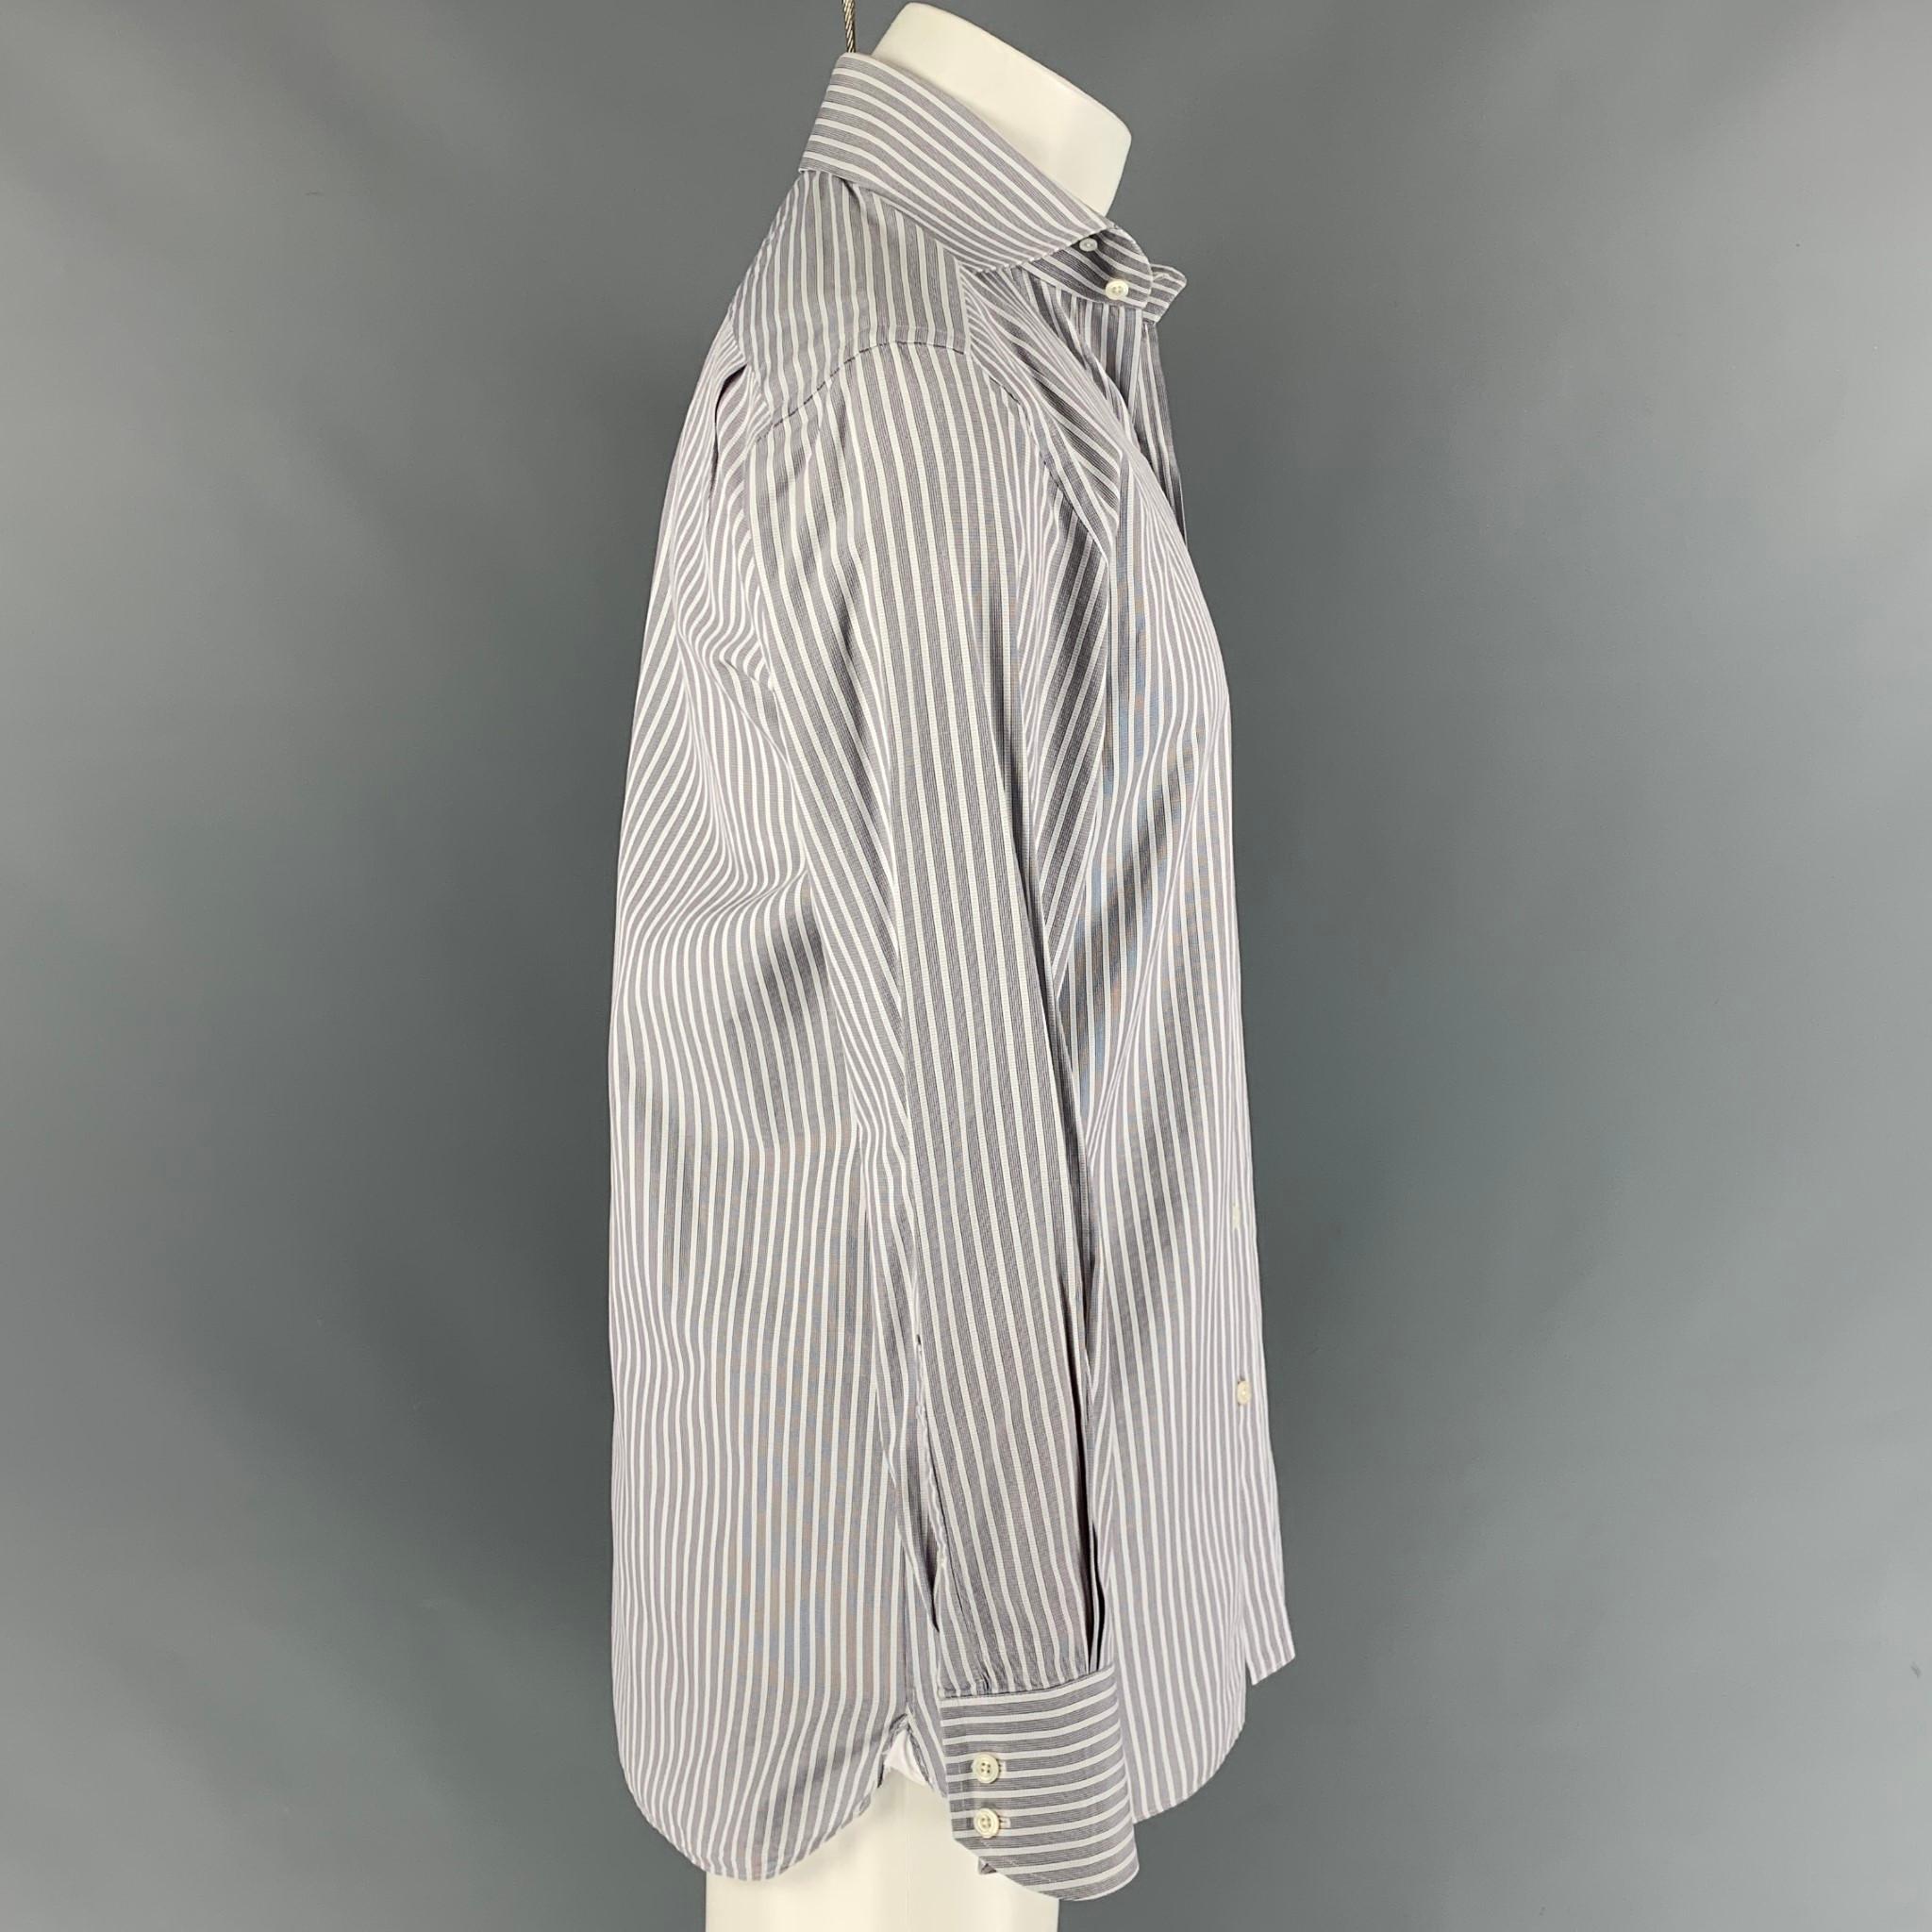 TOM FORD long sleeve shirt comes in a black & white checkered cotton featuring a button up style and a spread collar. Made in Switzerland.

Very Good Pre-Owned Condition.
Marked: 44/ 17.5

Measurements:

Shoulder: 19 in.
Chest: 48 in.
Sleeve: 27